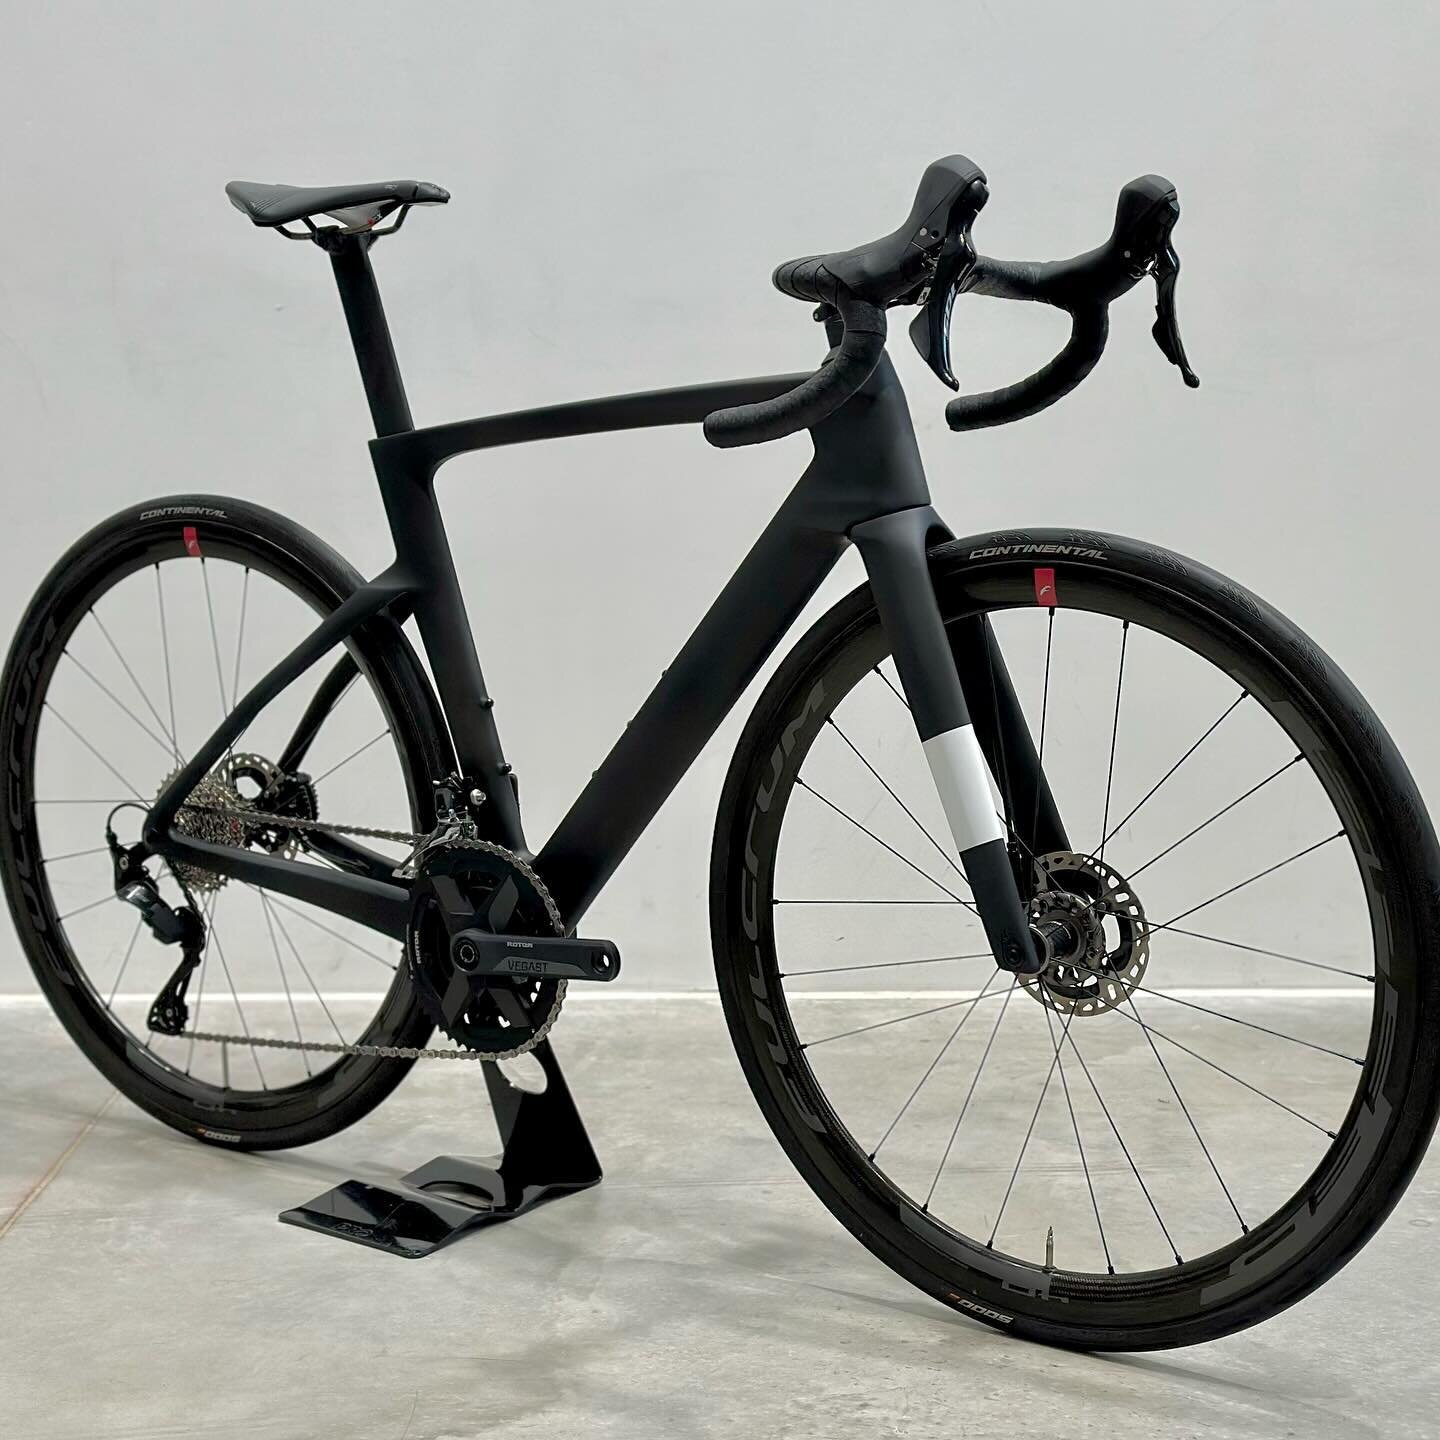 Here is @amc.png Avec Sythe build in the stealthy raw carbon and white design. Individually tailored with a Shimano 105 mechanical groupset, Pro PLT carbon/alloy cockpit, and a (temporary) set of Fulcrum carbon wheels. Weighing in at an impressive we